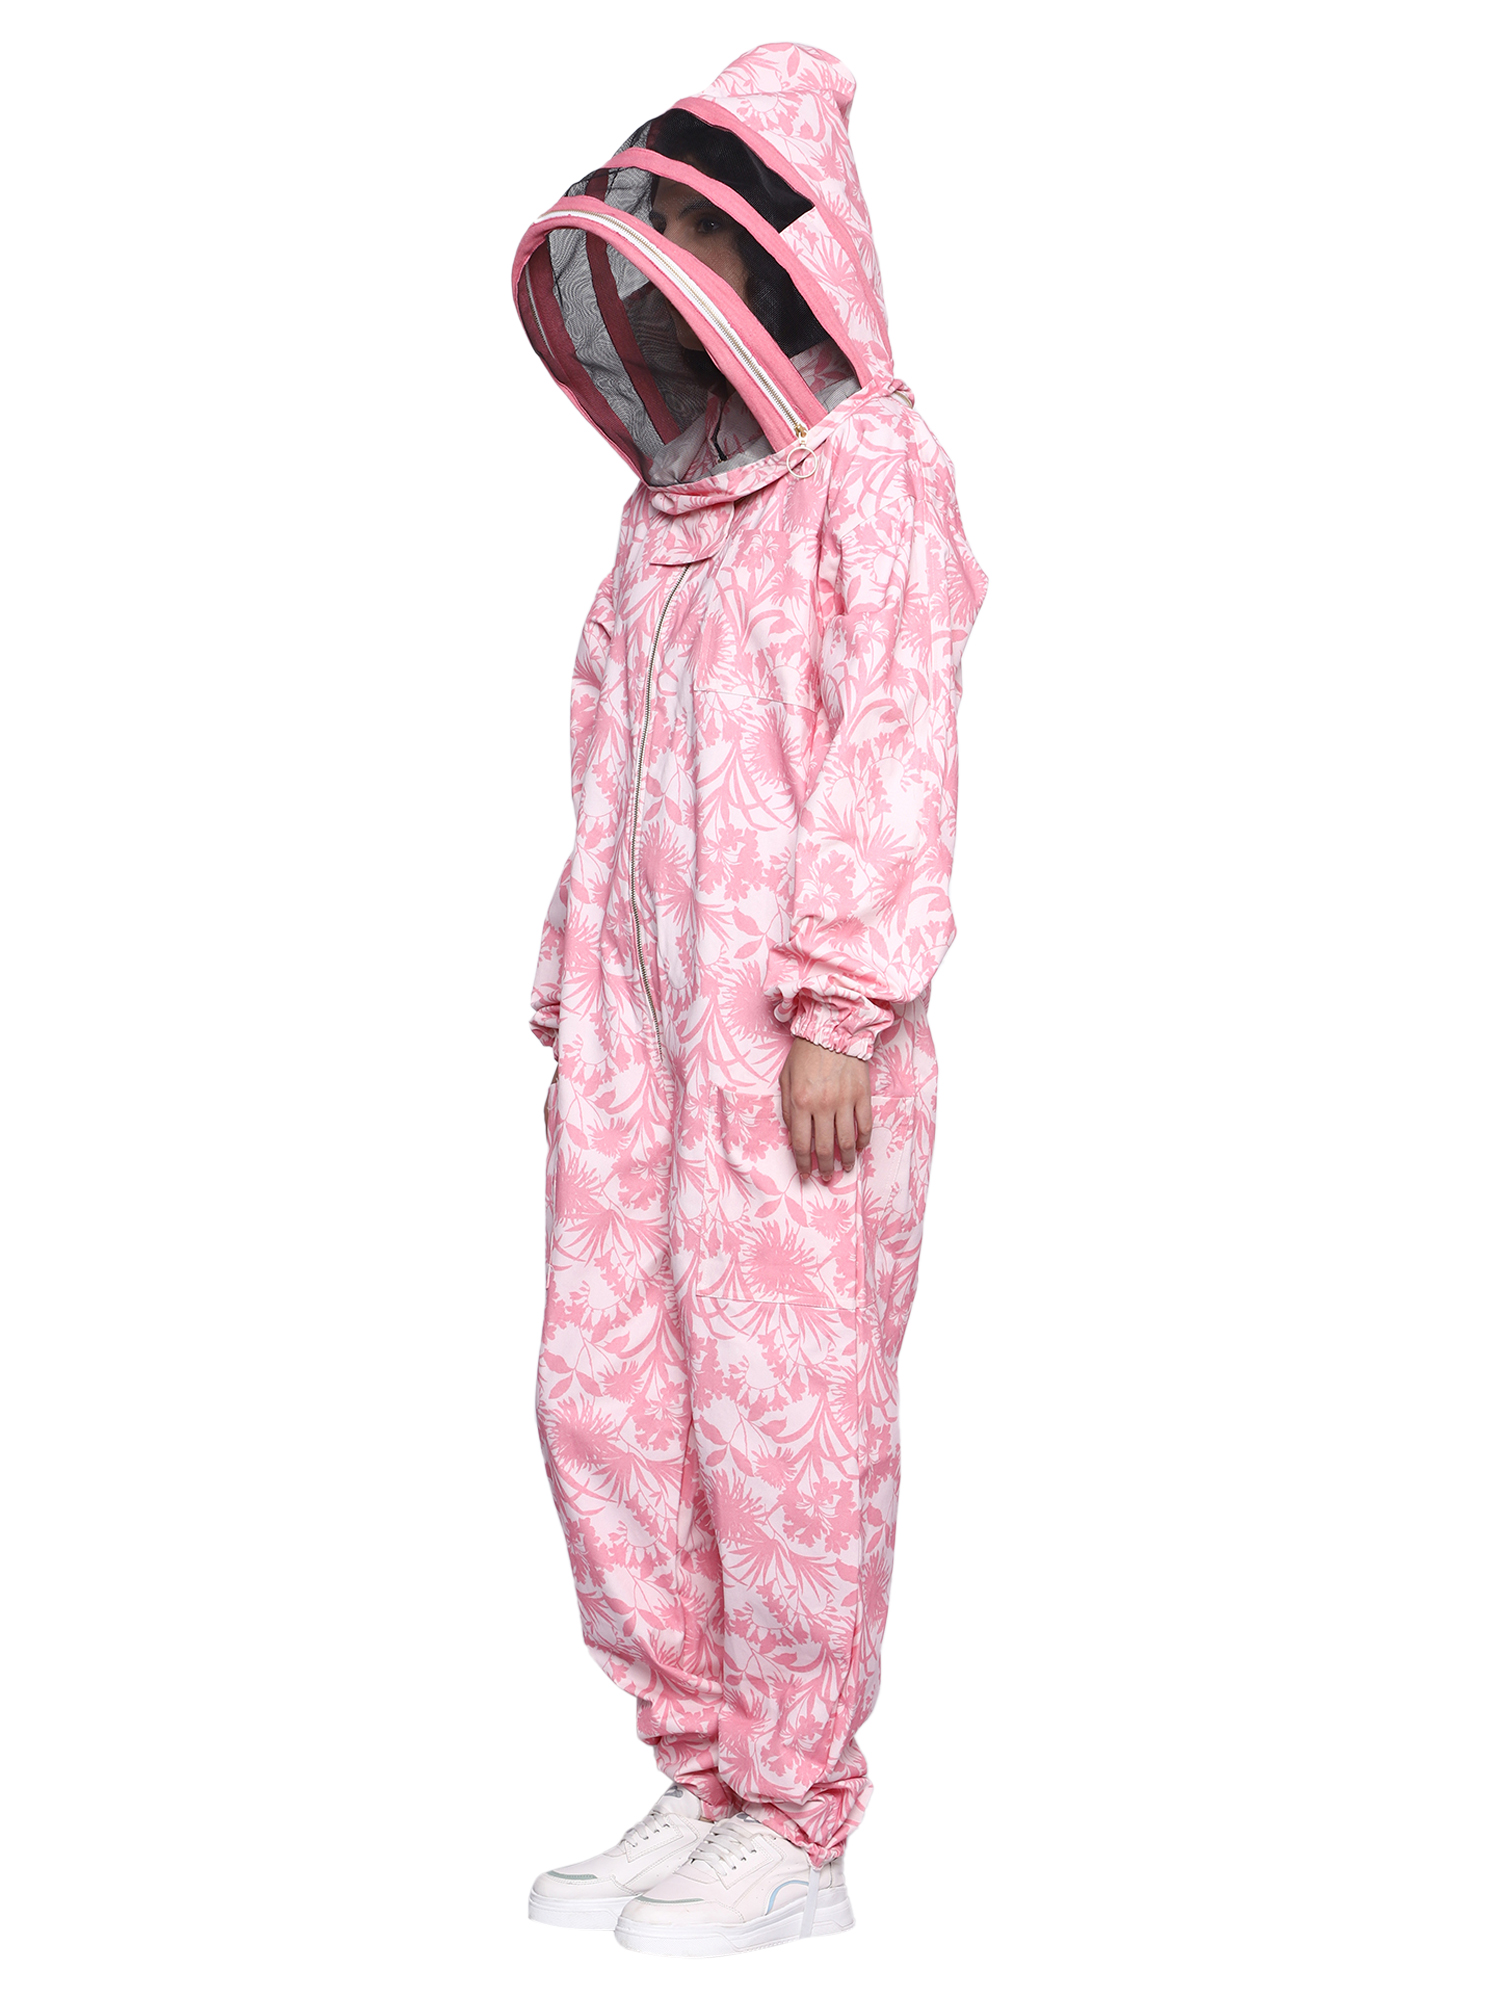 Beeattire Women's Pink Printed 100% Cotton Bee Suit | Stylish & Protective